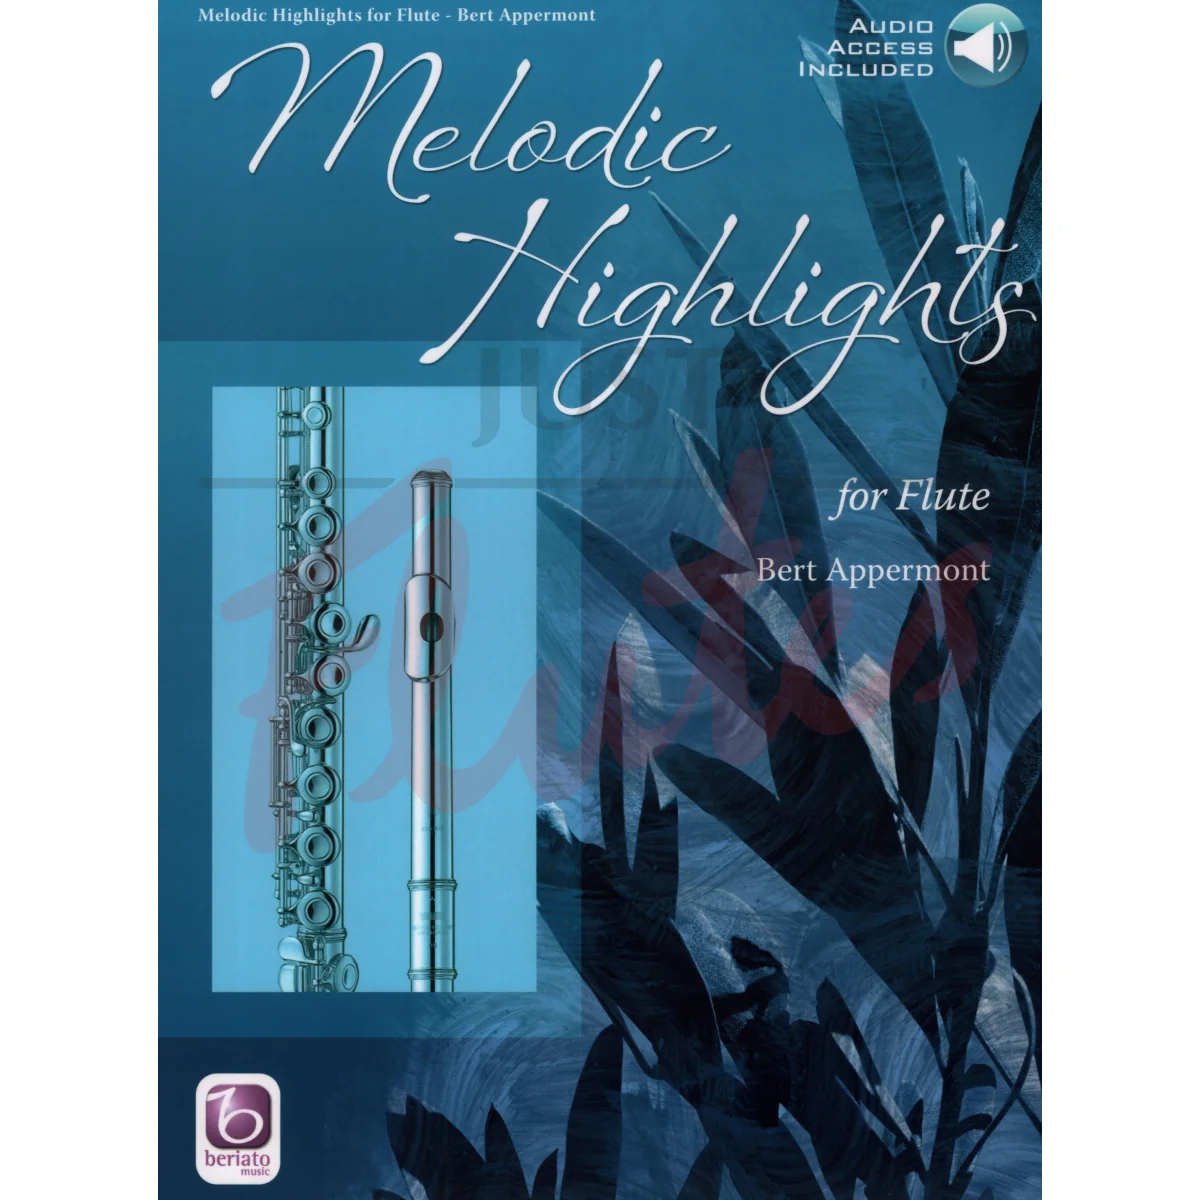 Melodic Highlights for Flute